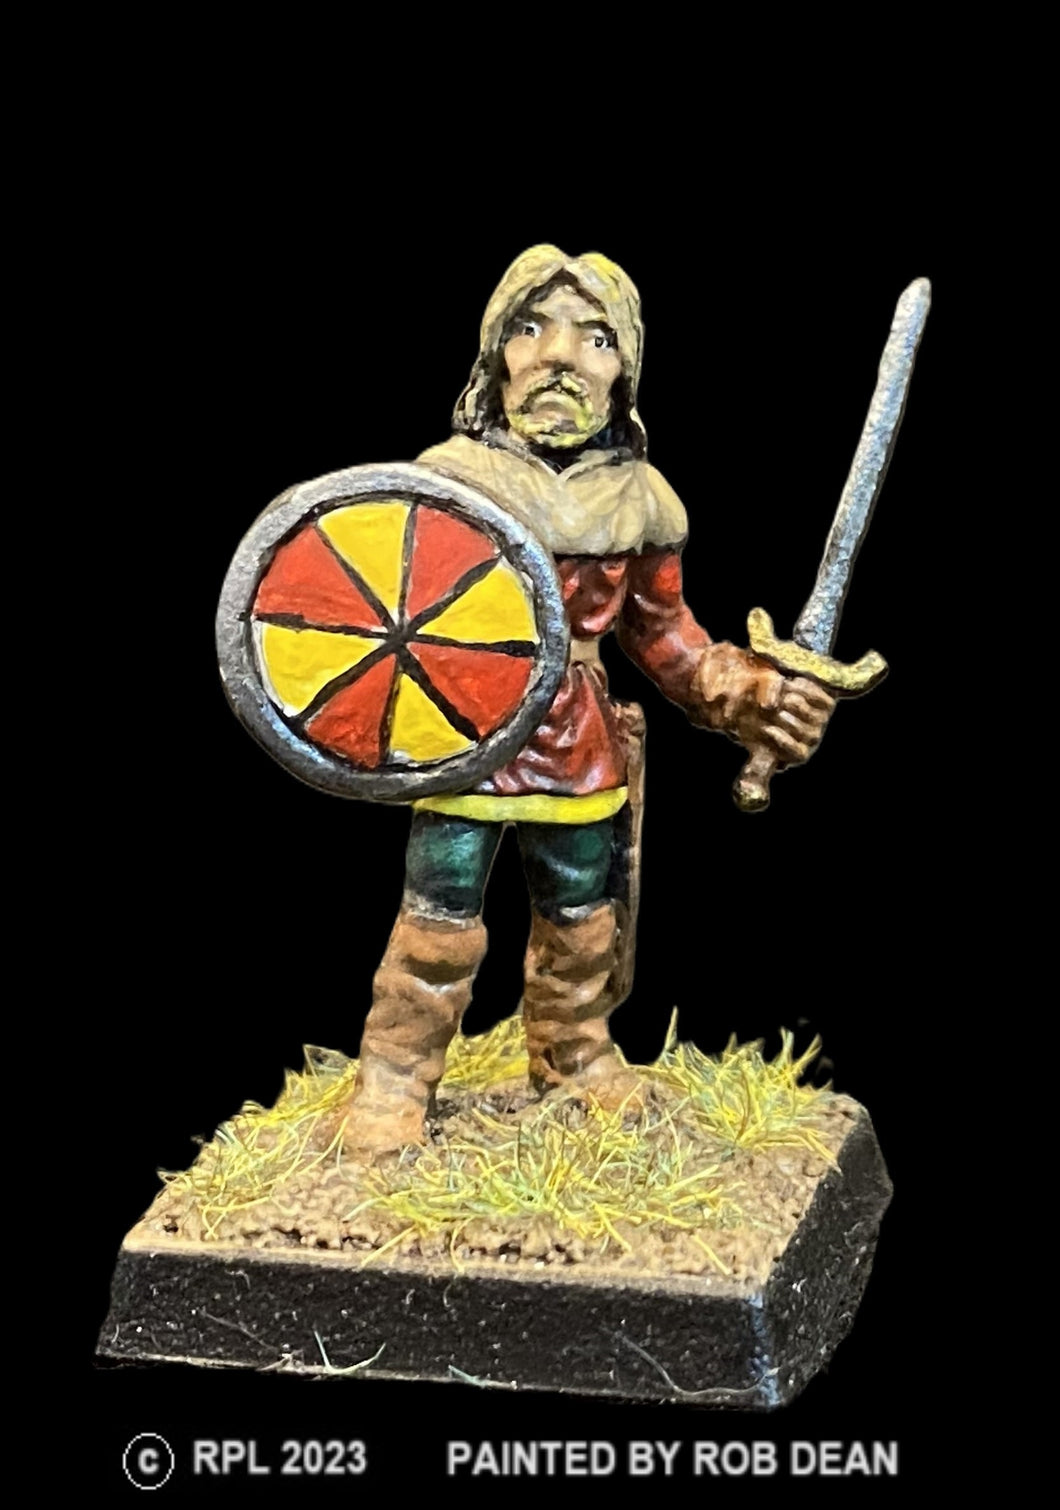 52-0005:  Adventurer with Sword and Round Shield V